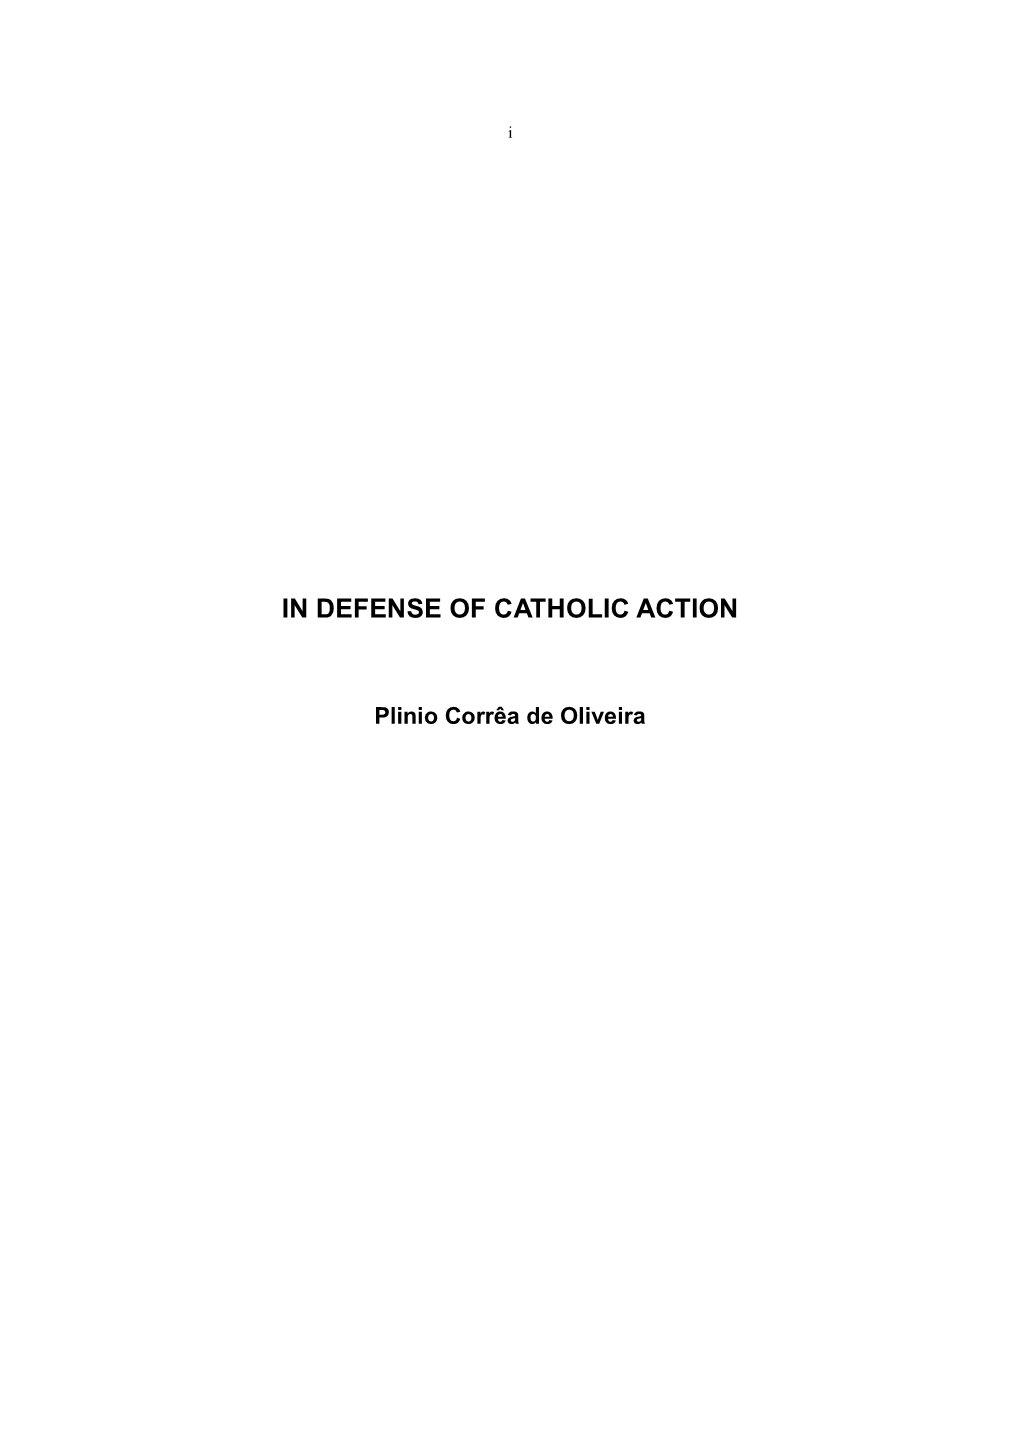 In Defense of Catholic Action